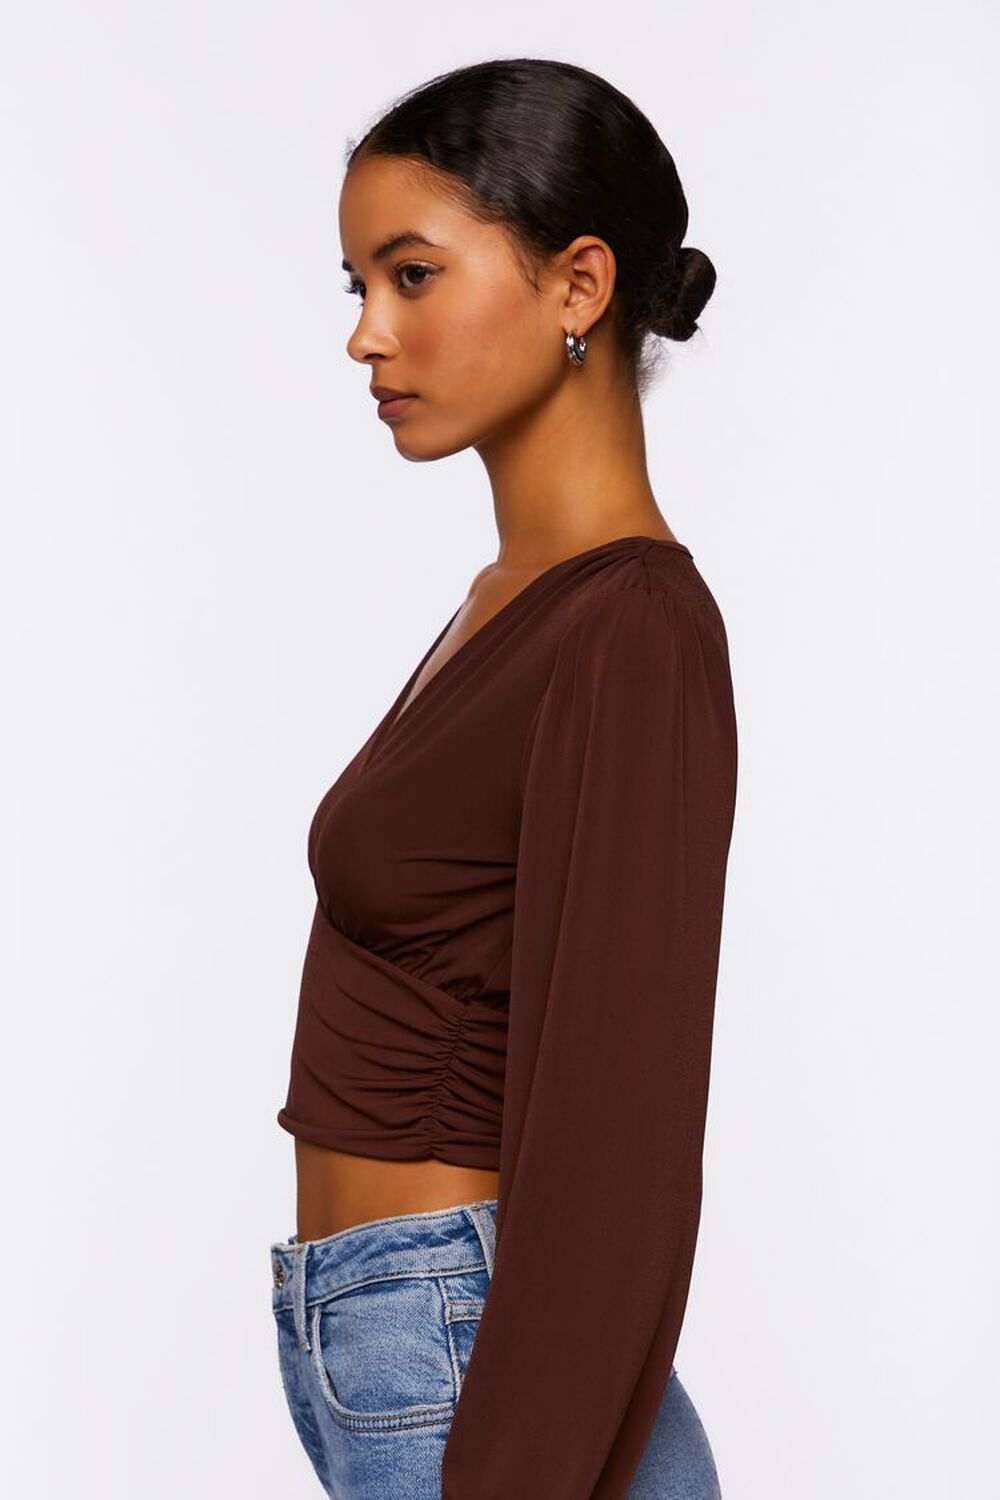 CHOCOLATE Plunging Shirred Crop Top, image 2